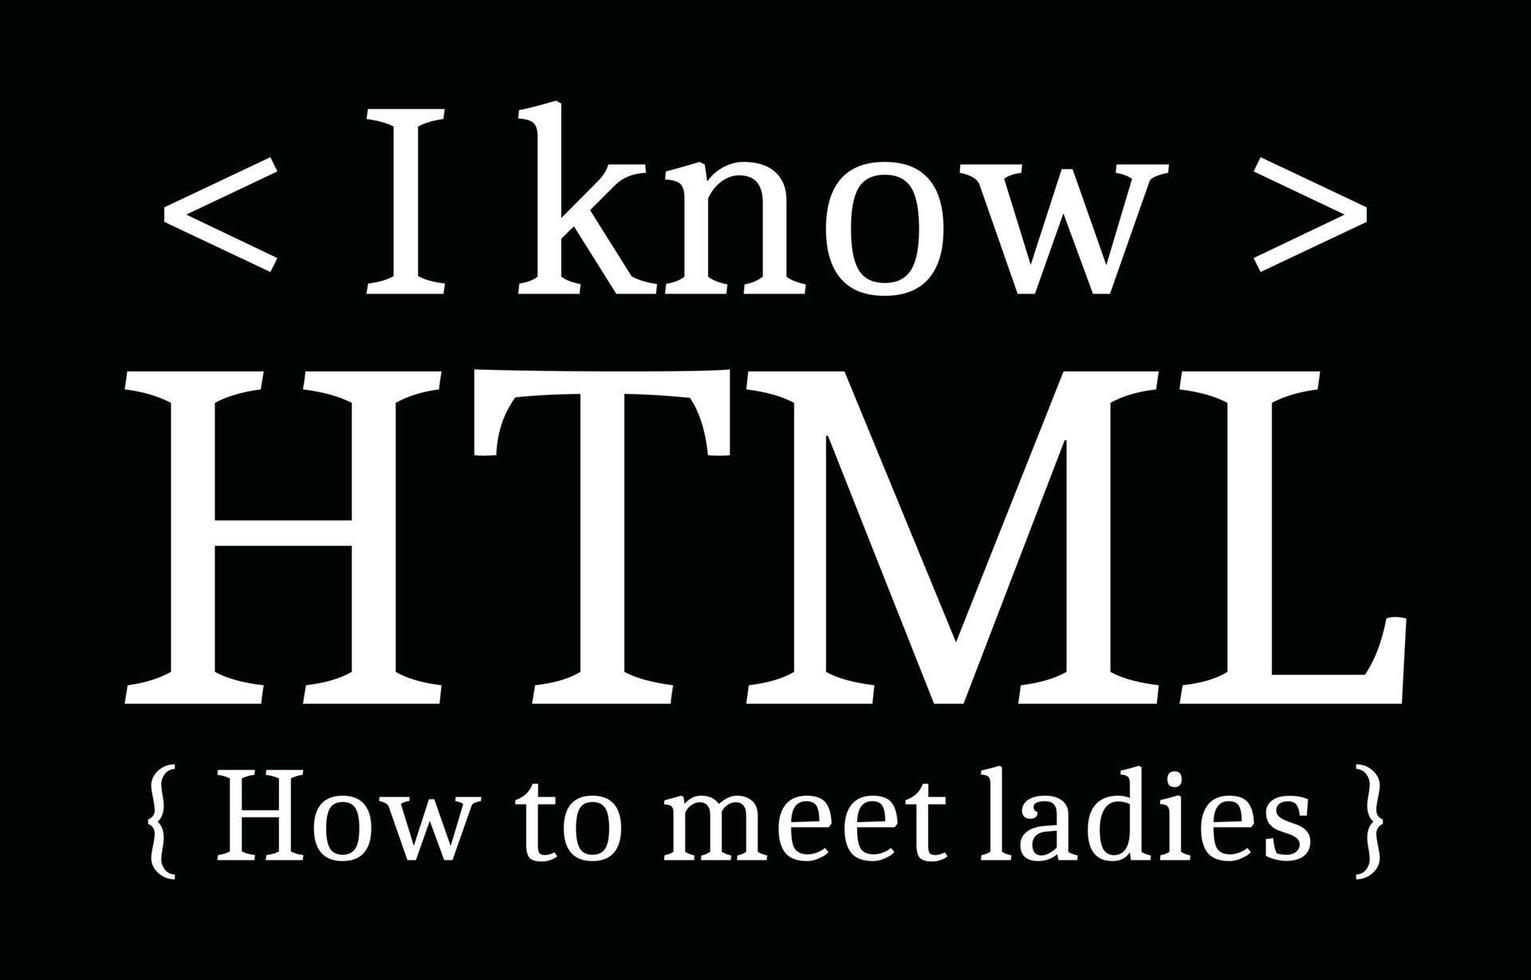 Funny web designer quote design. I know HTML, How to meet ladies. vector